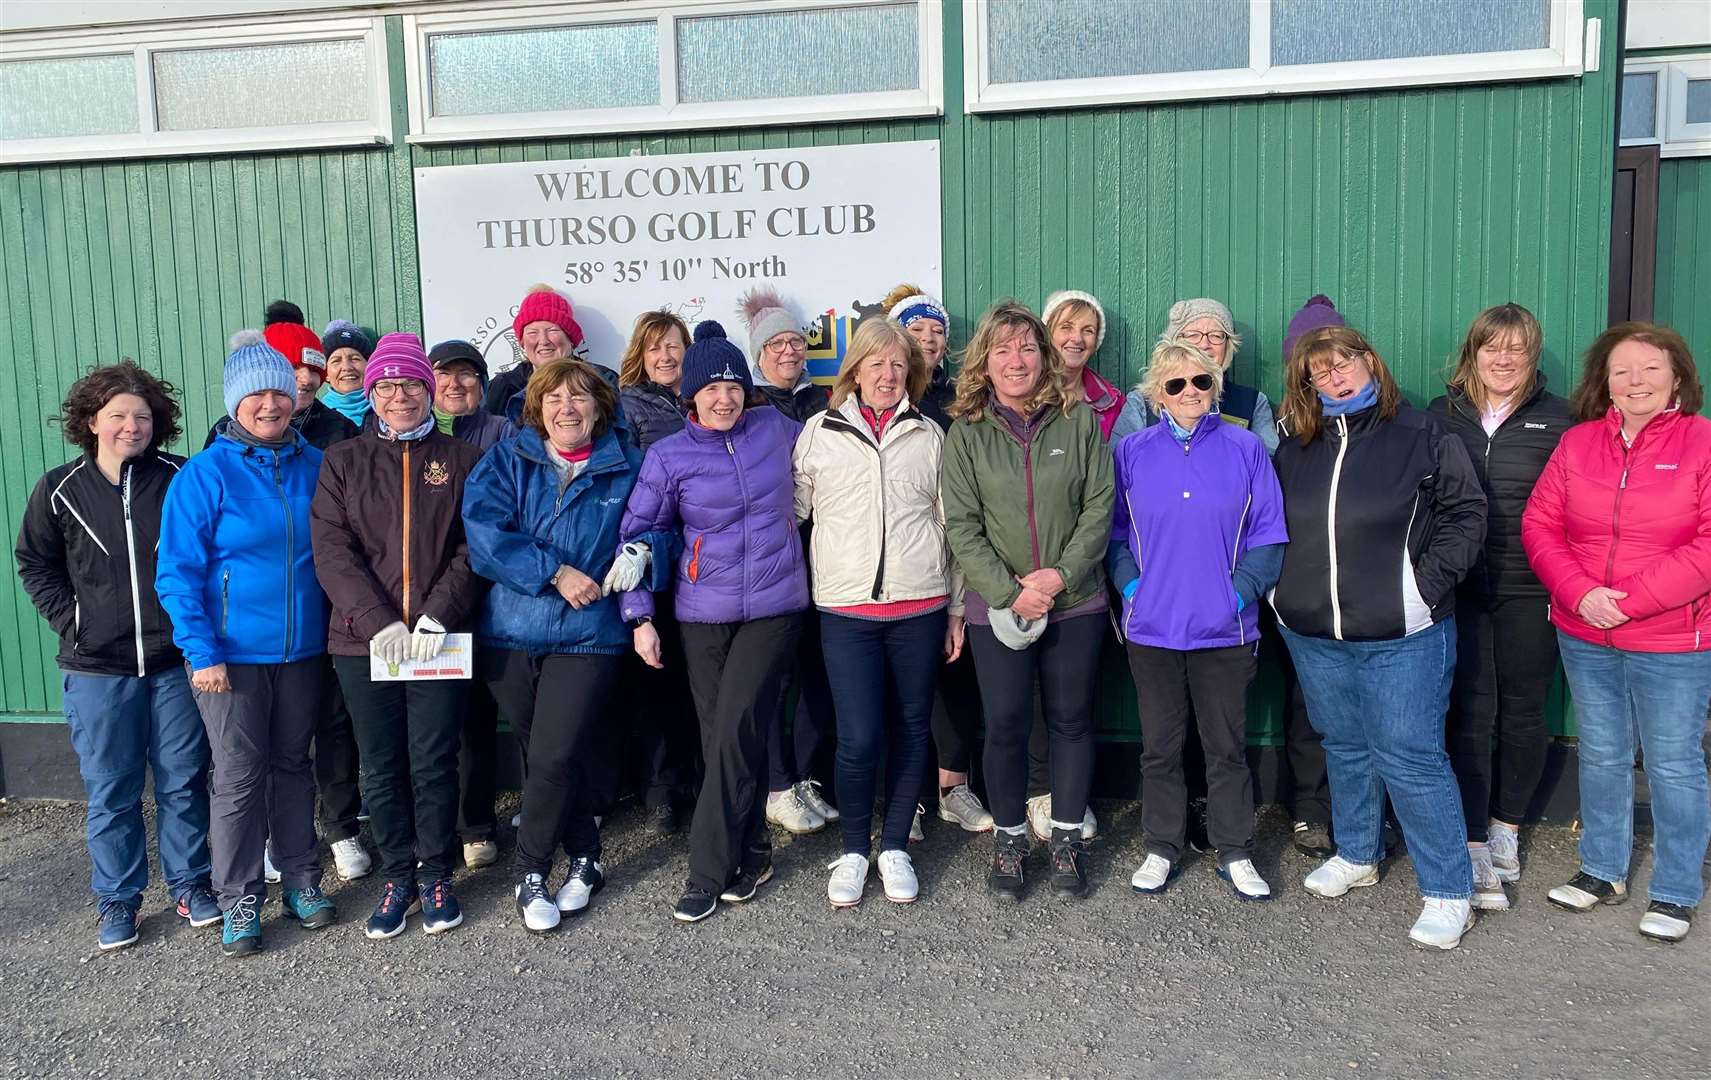 The new season has begun for Thurso Golf Club's ladies, with new and older faces taking part.